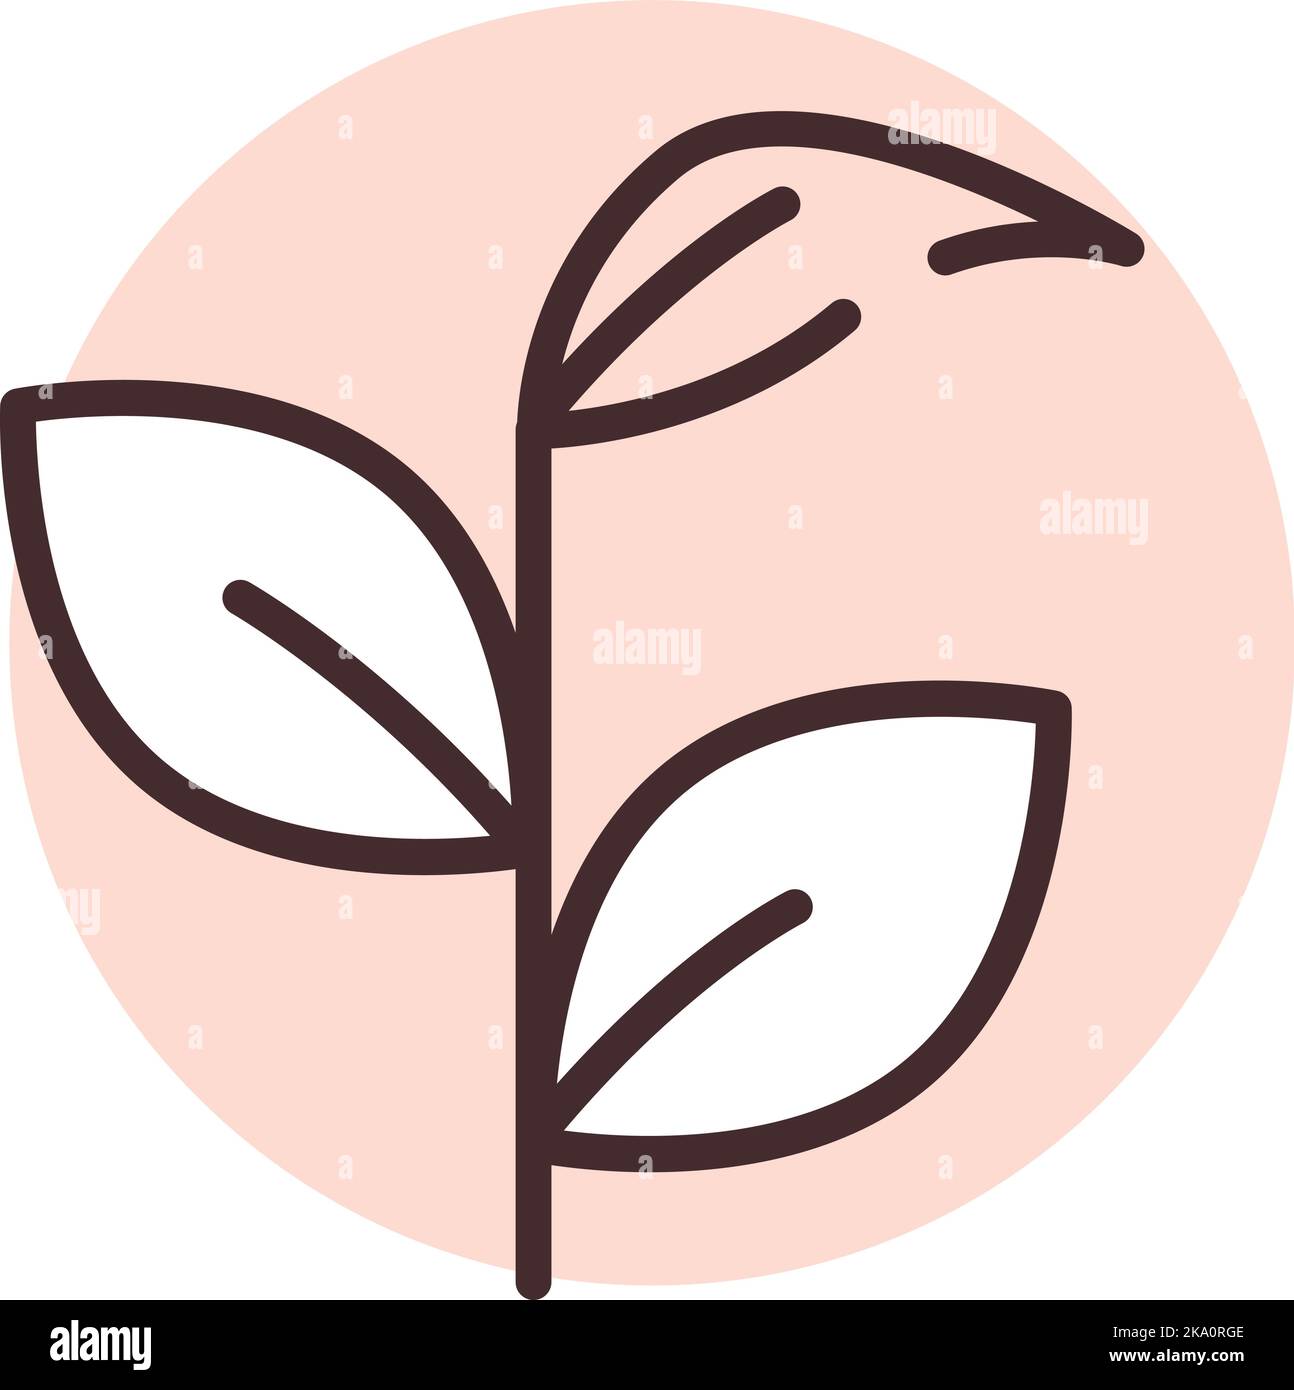 Eco allergy, illustration or icon, vector on white background. Stock Vector